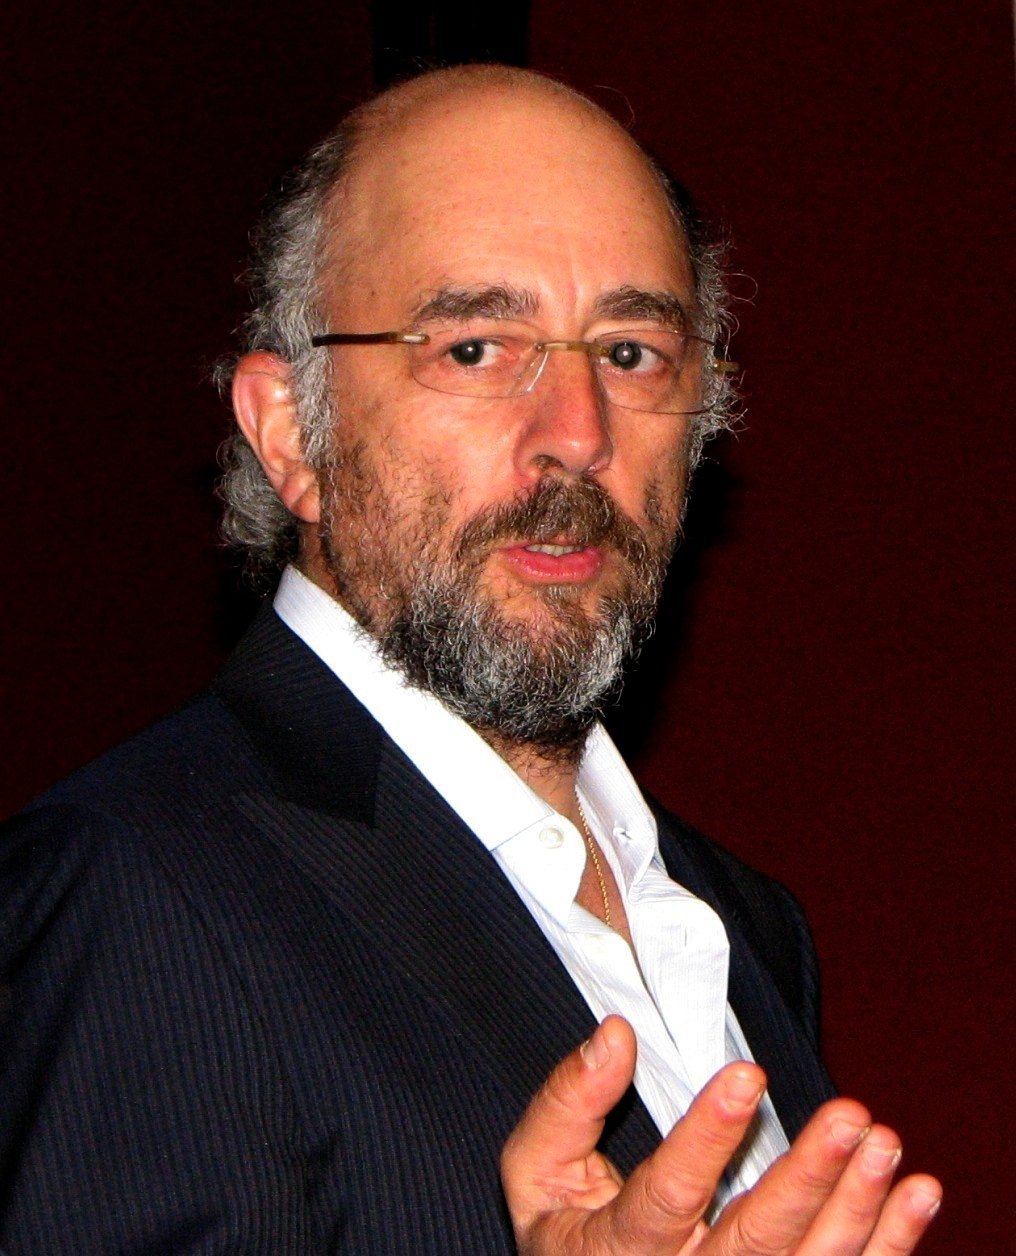 Richard Schiff speaking at the Oxford Union in May 2009. | Source: Wikimedia Commons